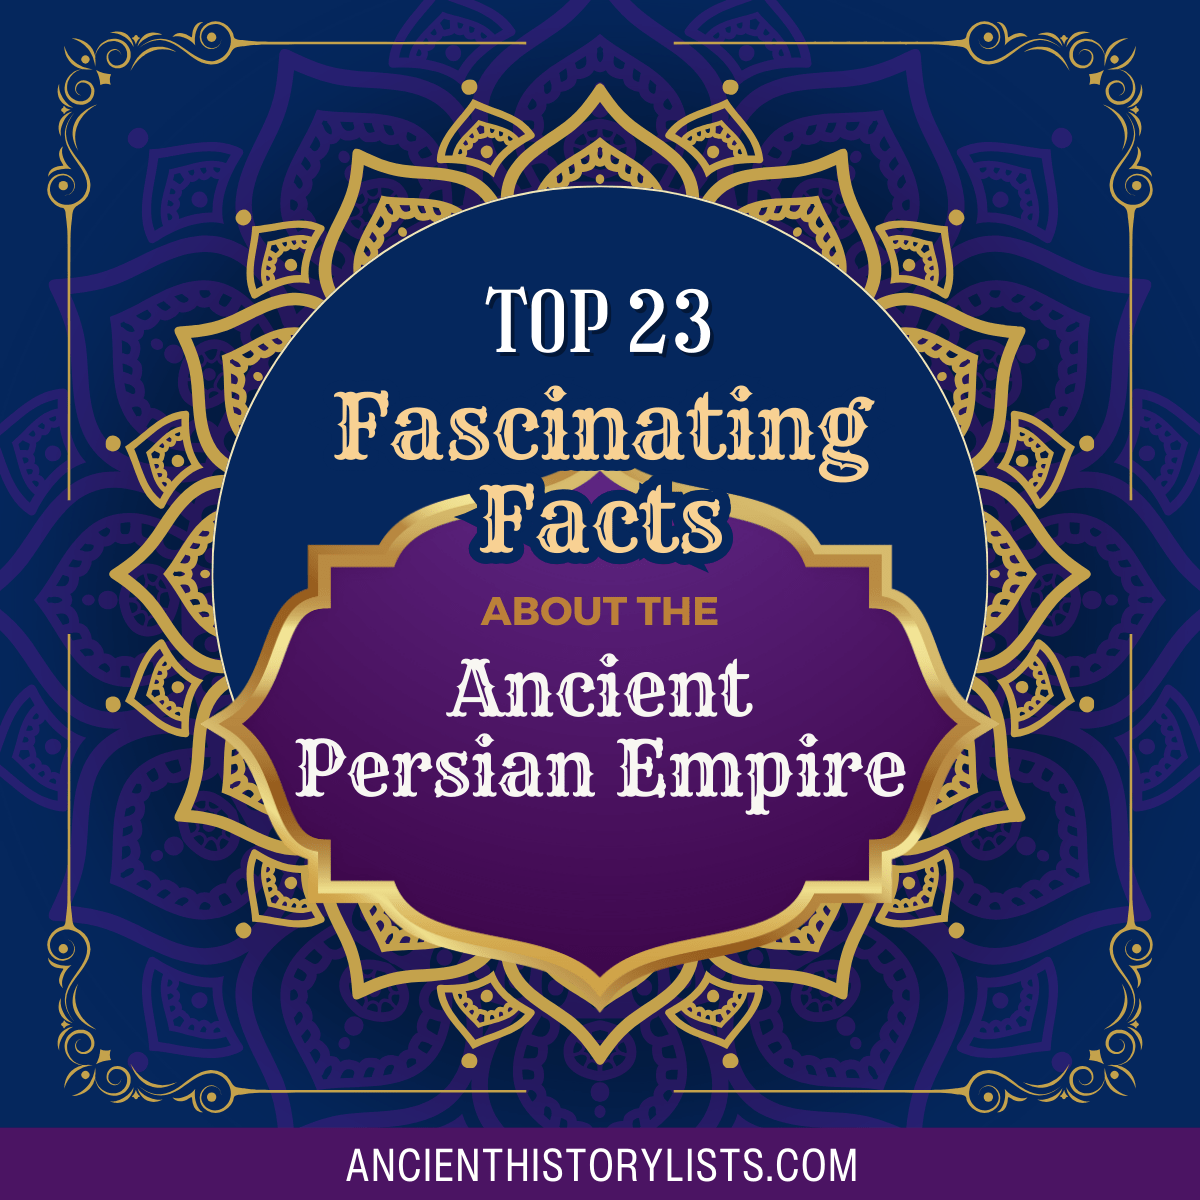 Facts about the Ancient Persian Empire